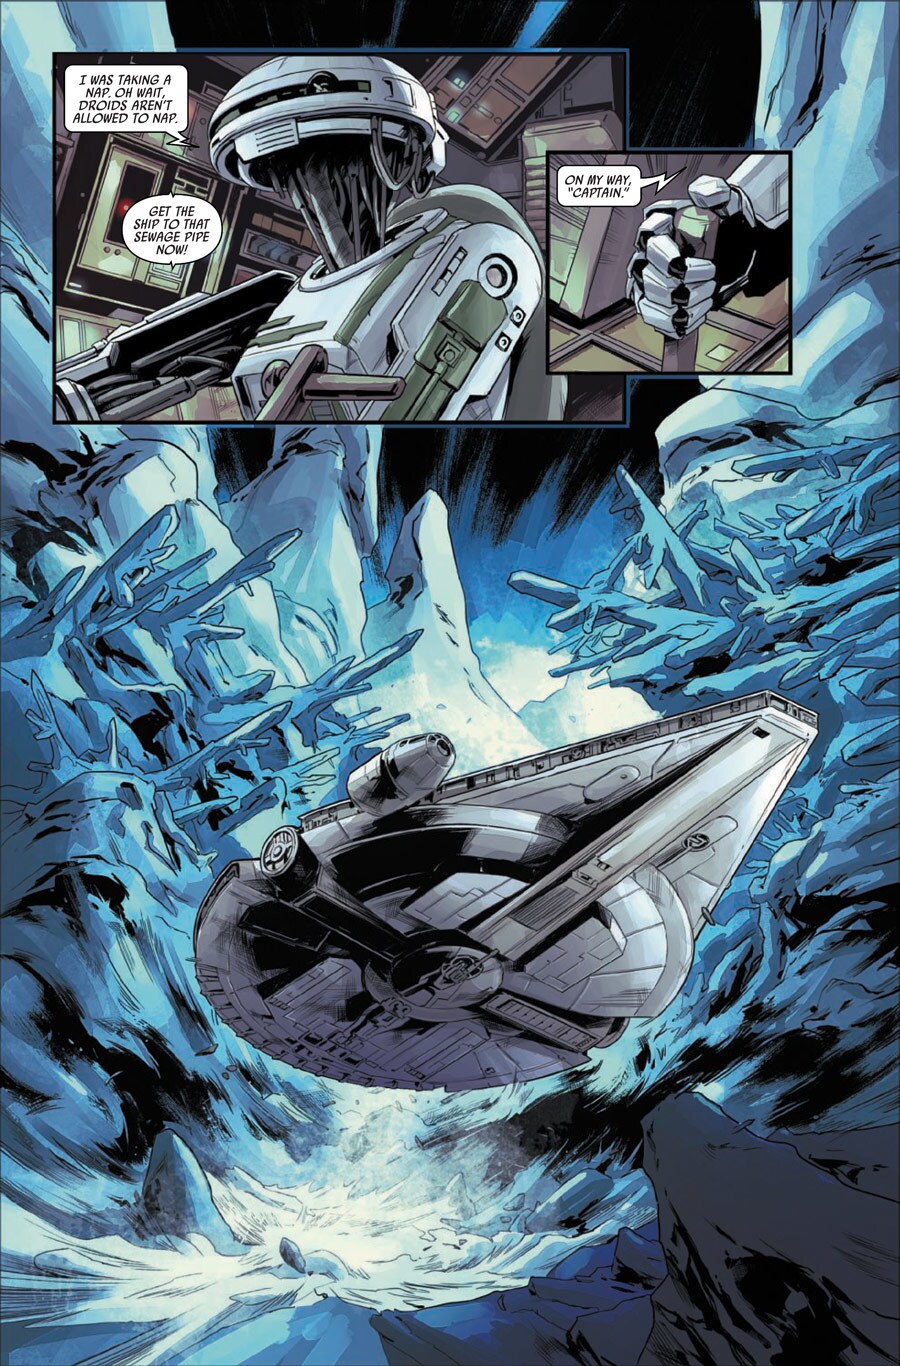 In several panels from the comic book series Lando: Double or Nothing, L3-37 makes an excuse about napping before taking off in the Millennium Falcon.